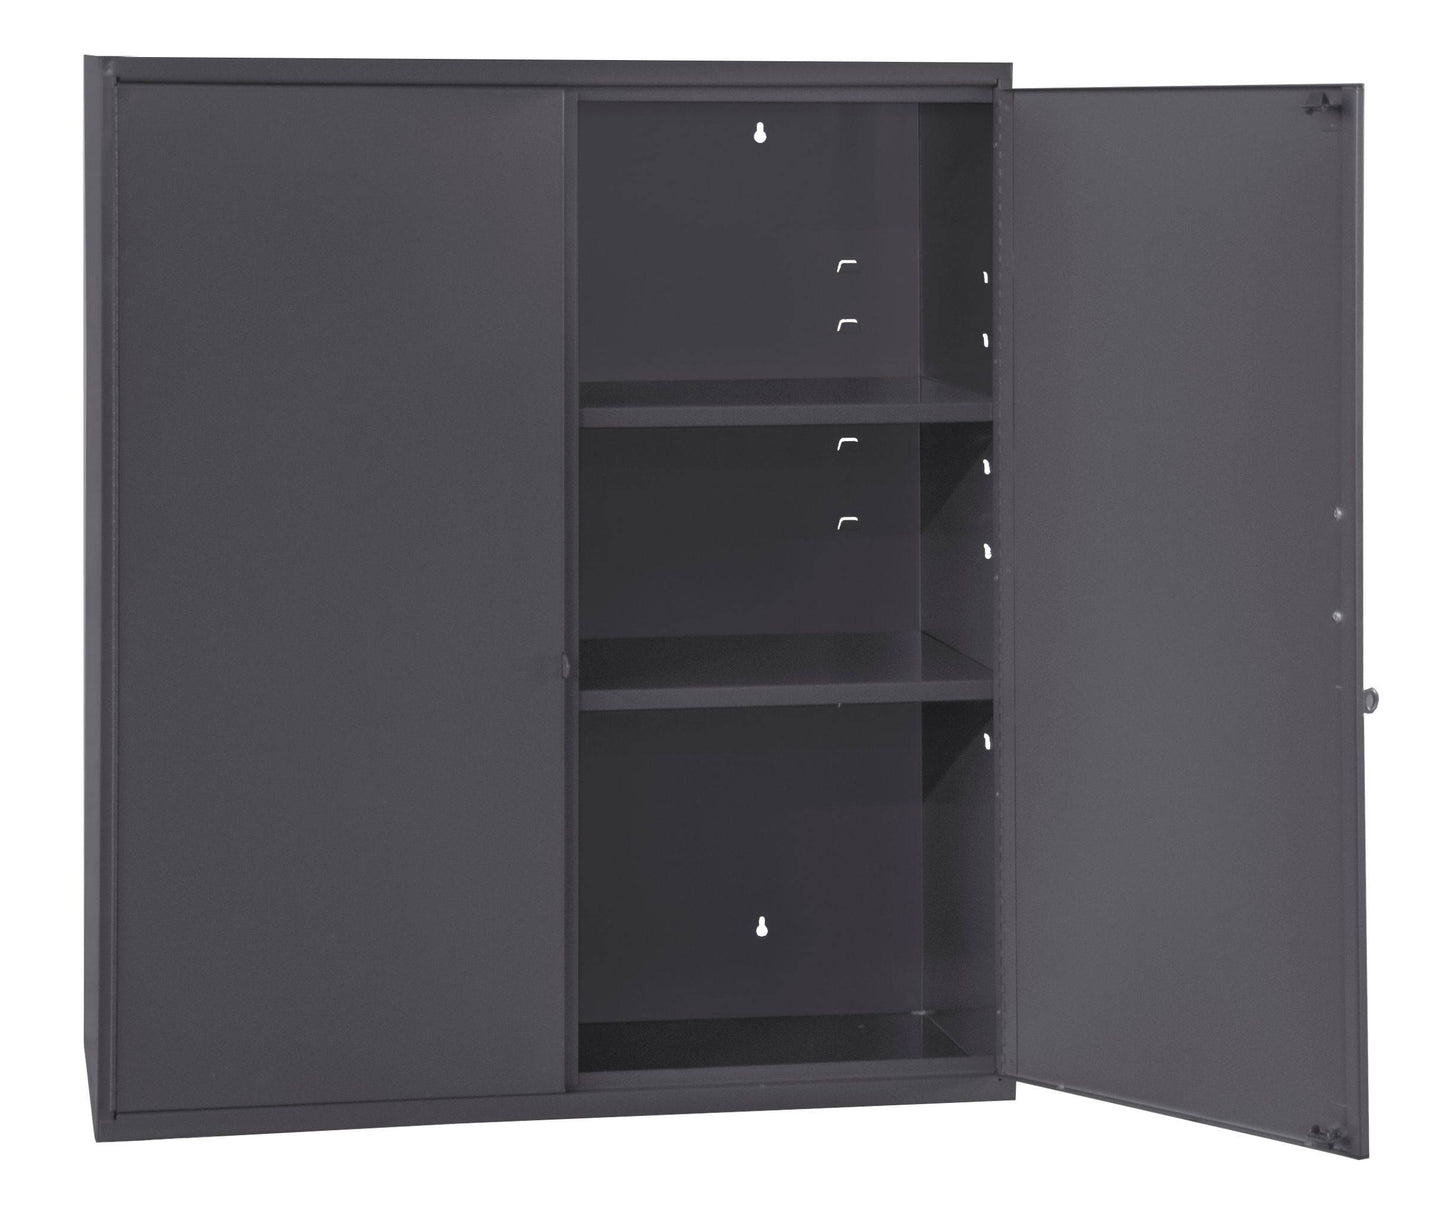 Wall Mounted Storage Cabinet, 3 Shelves - Durham